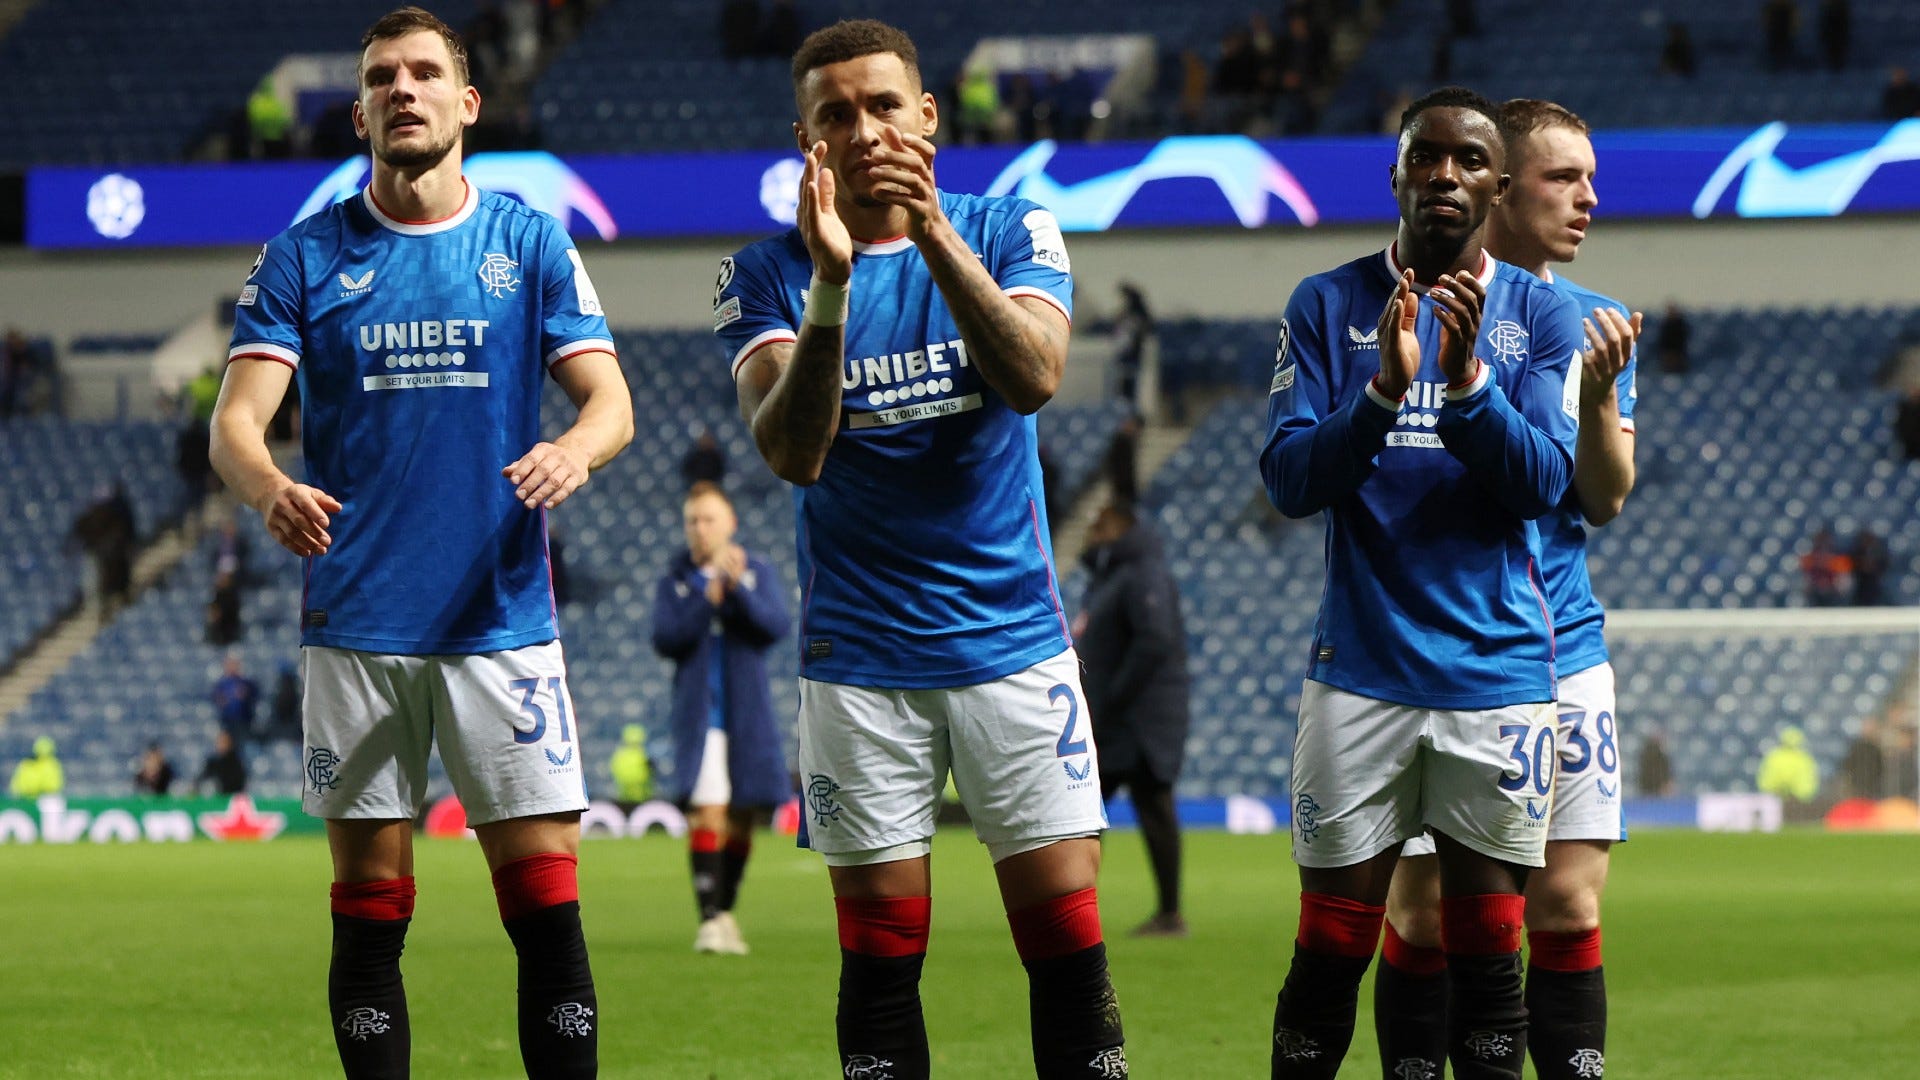 St Mirren vs Rangers Live stream, TV channel, kick-off time and where to watch Goal US